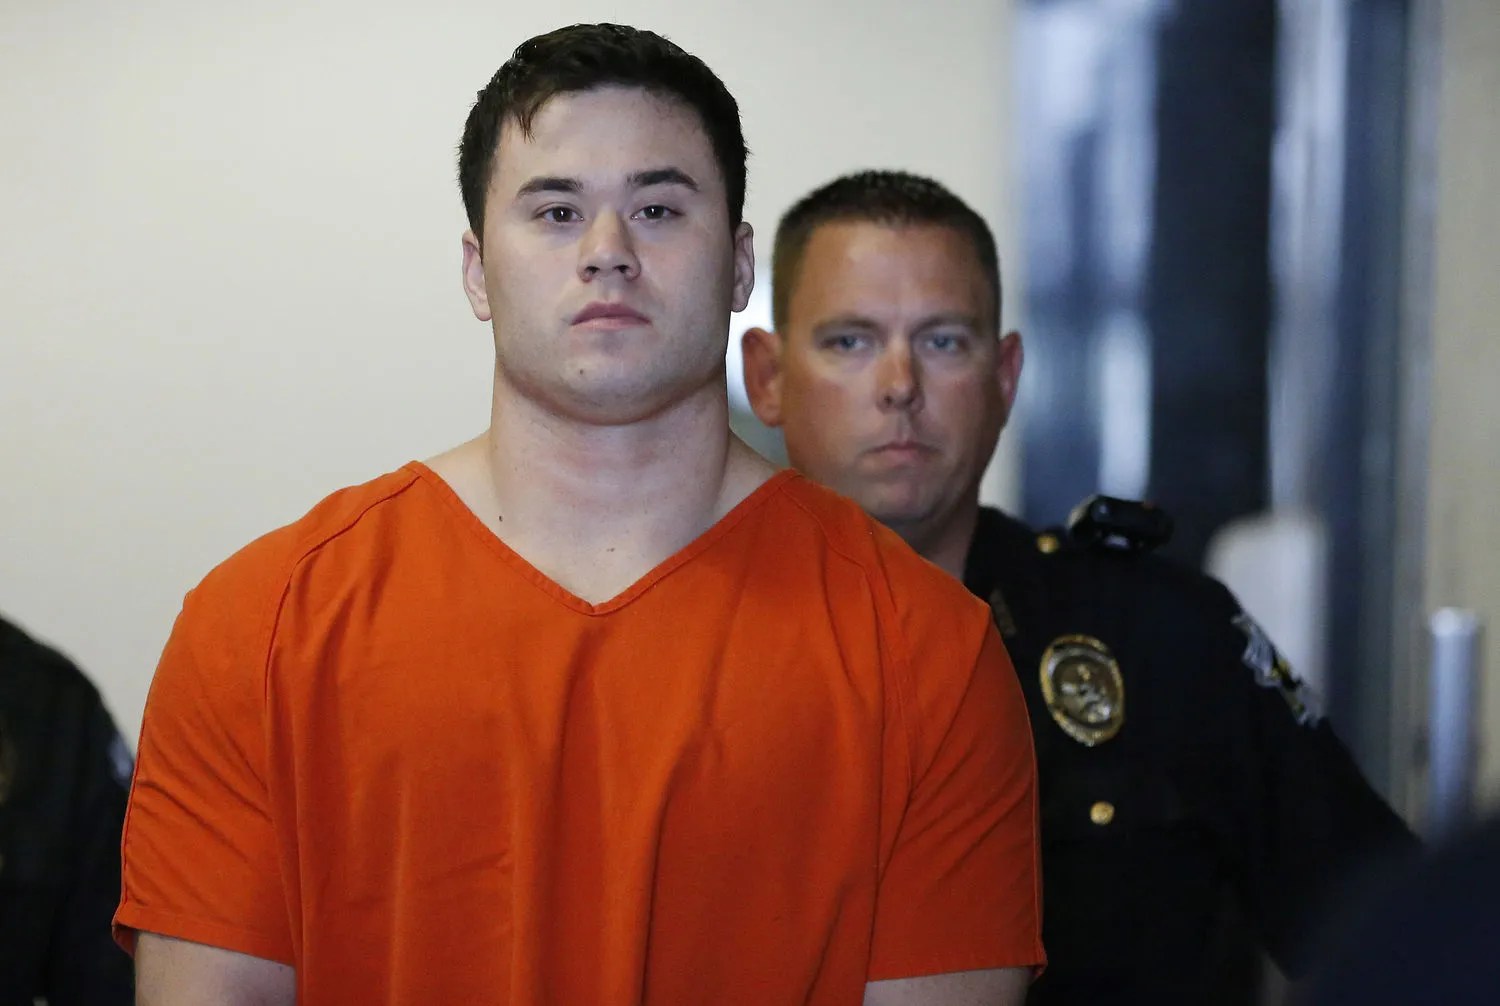 Daniel Holtzclaw, The Cop Charged With Sexually Assaulting 13 Black